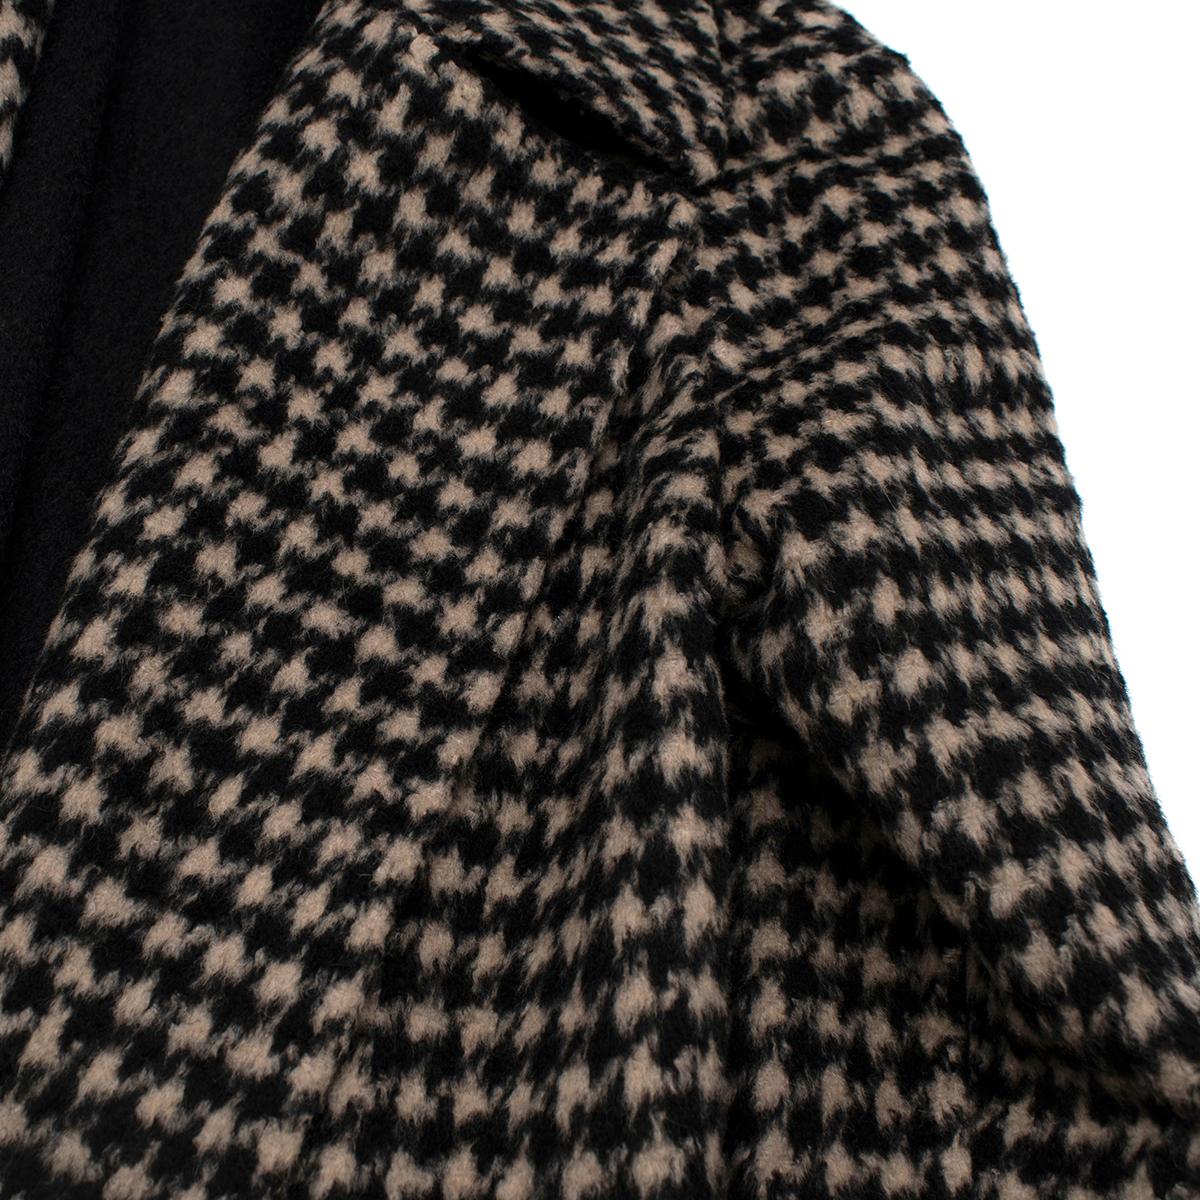 MaxMara Black & Beige Houndstooth Camelhair Coat - US Size 6 In Excellent Condition For Sale In London, GB